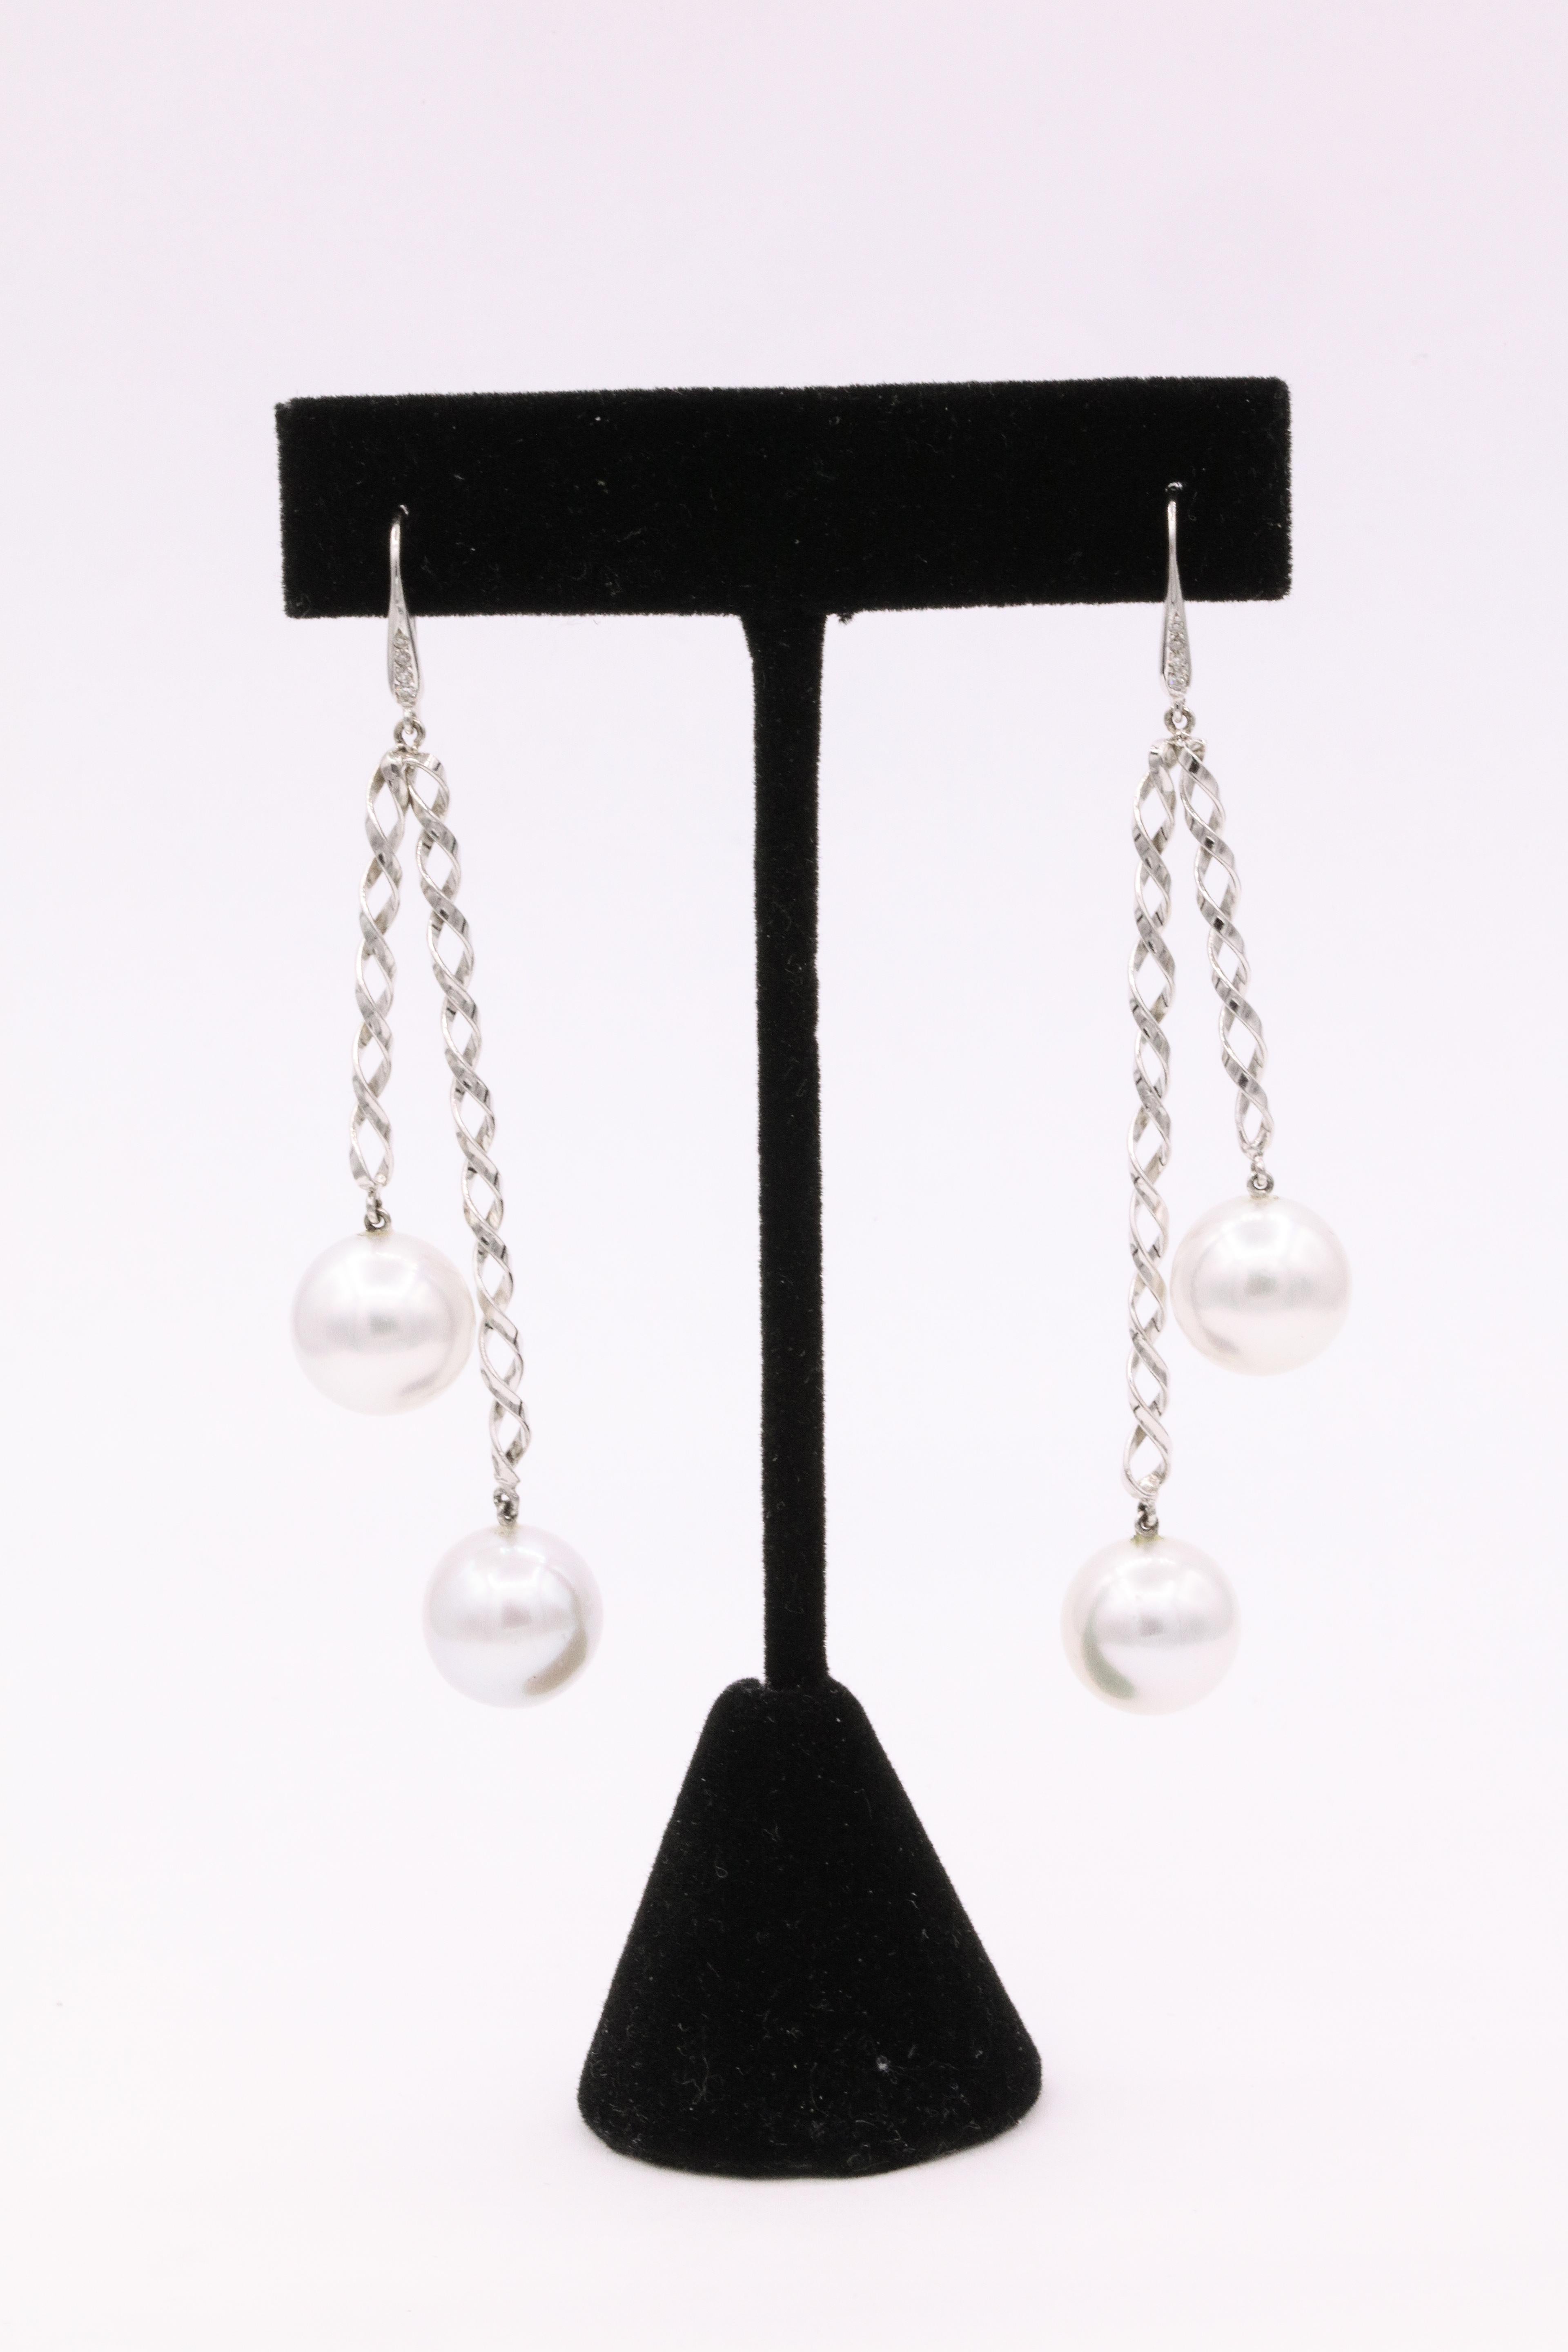 14K White gold swirl earrings featuring 8 round diamonds weighing 0.10 carats and four South Sea pearls measuring 12 mm. 
Can be worn day or night! 